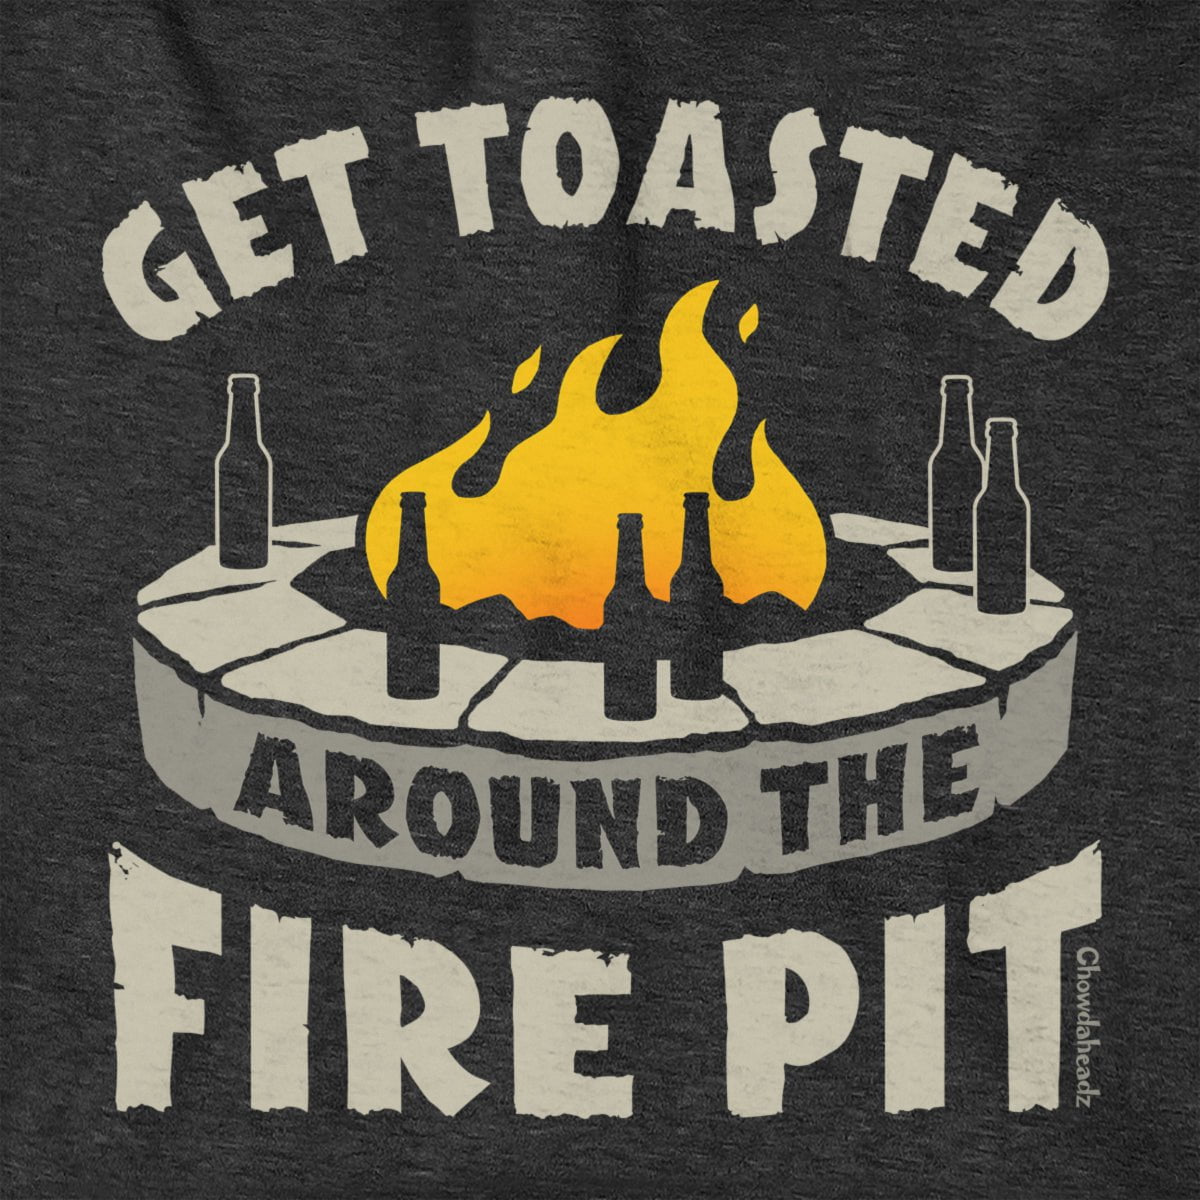 Get Toasted Around The Fire Pit Hoodie - Chowdaheadz